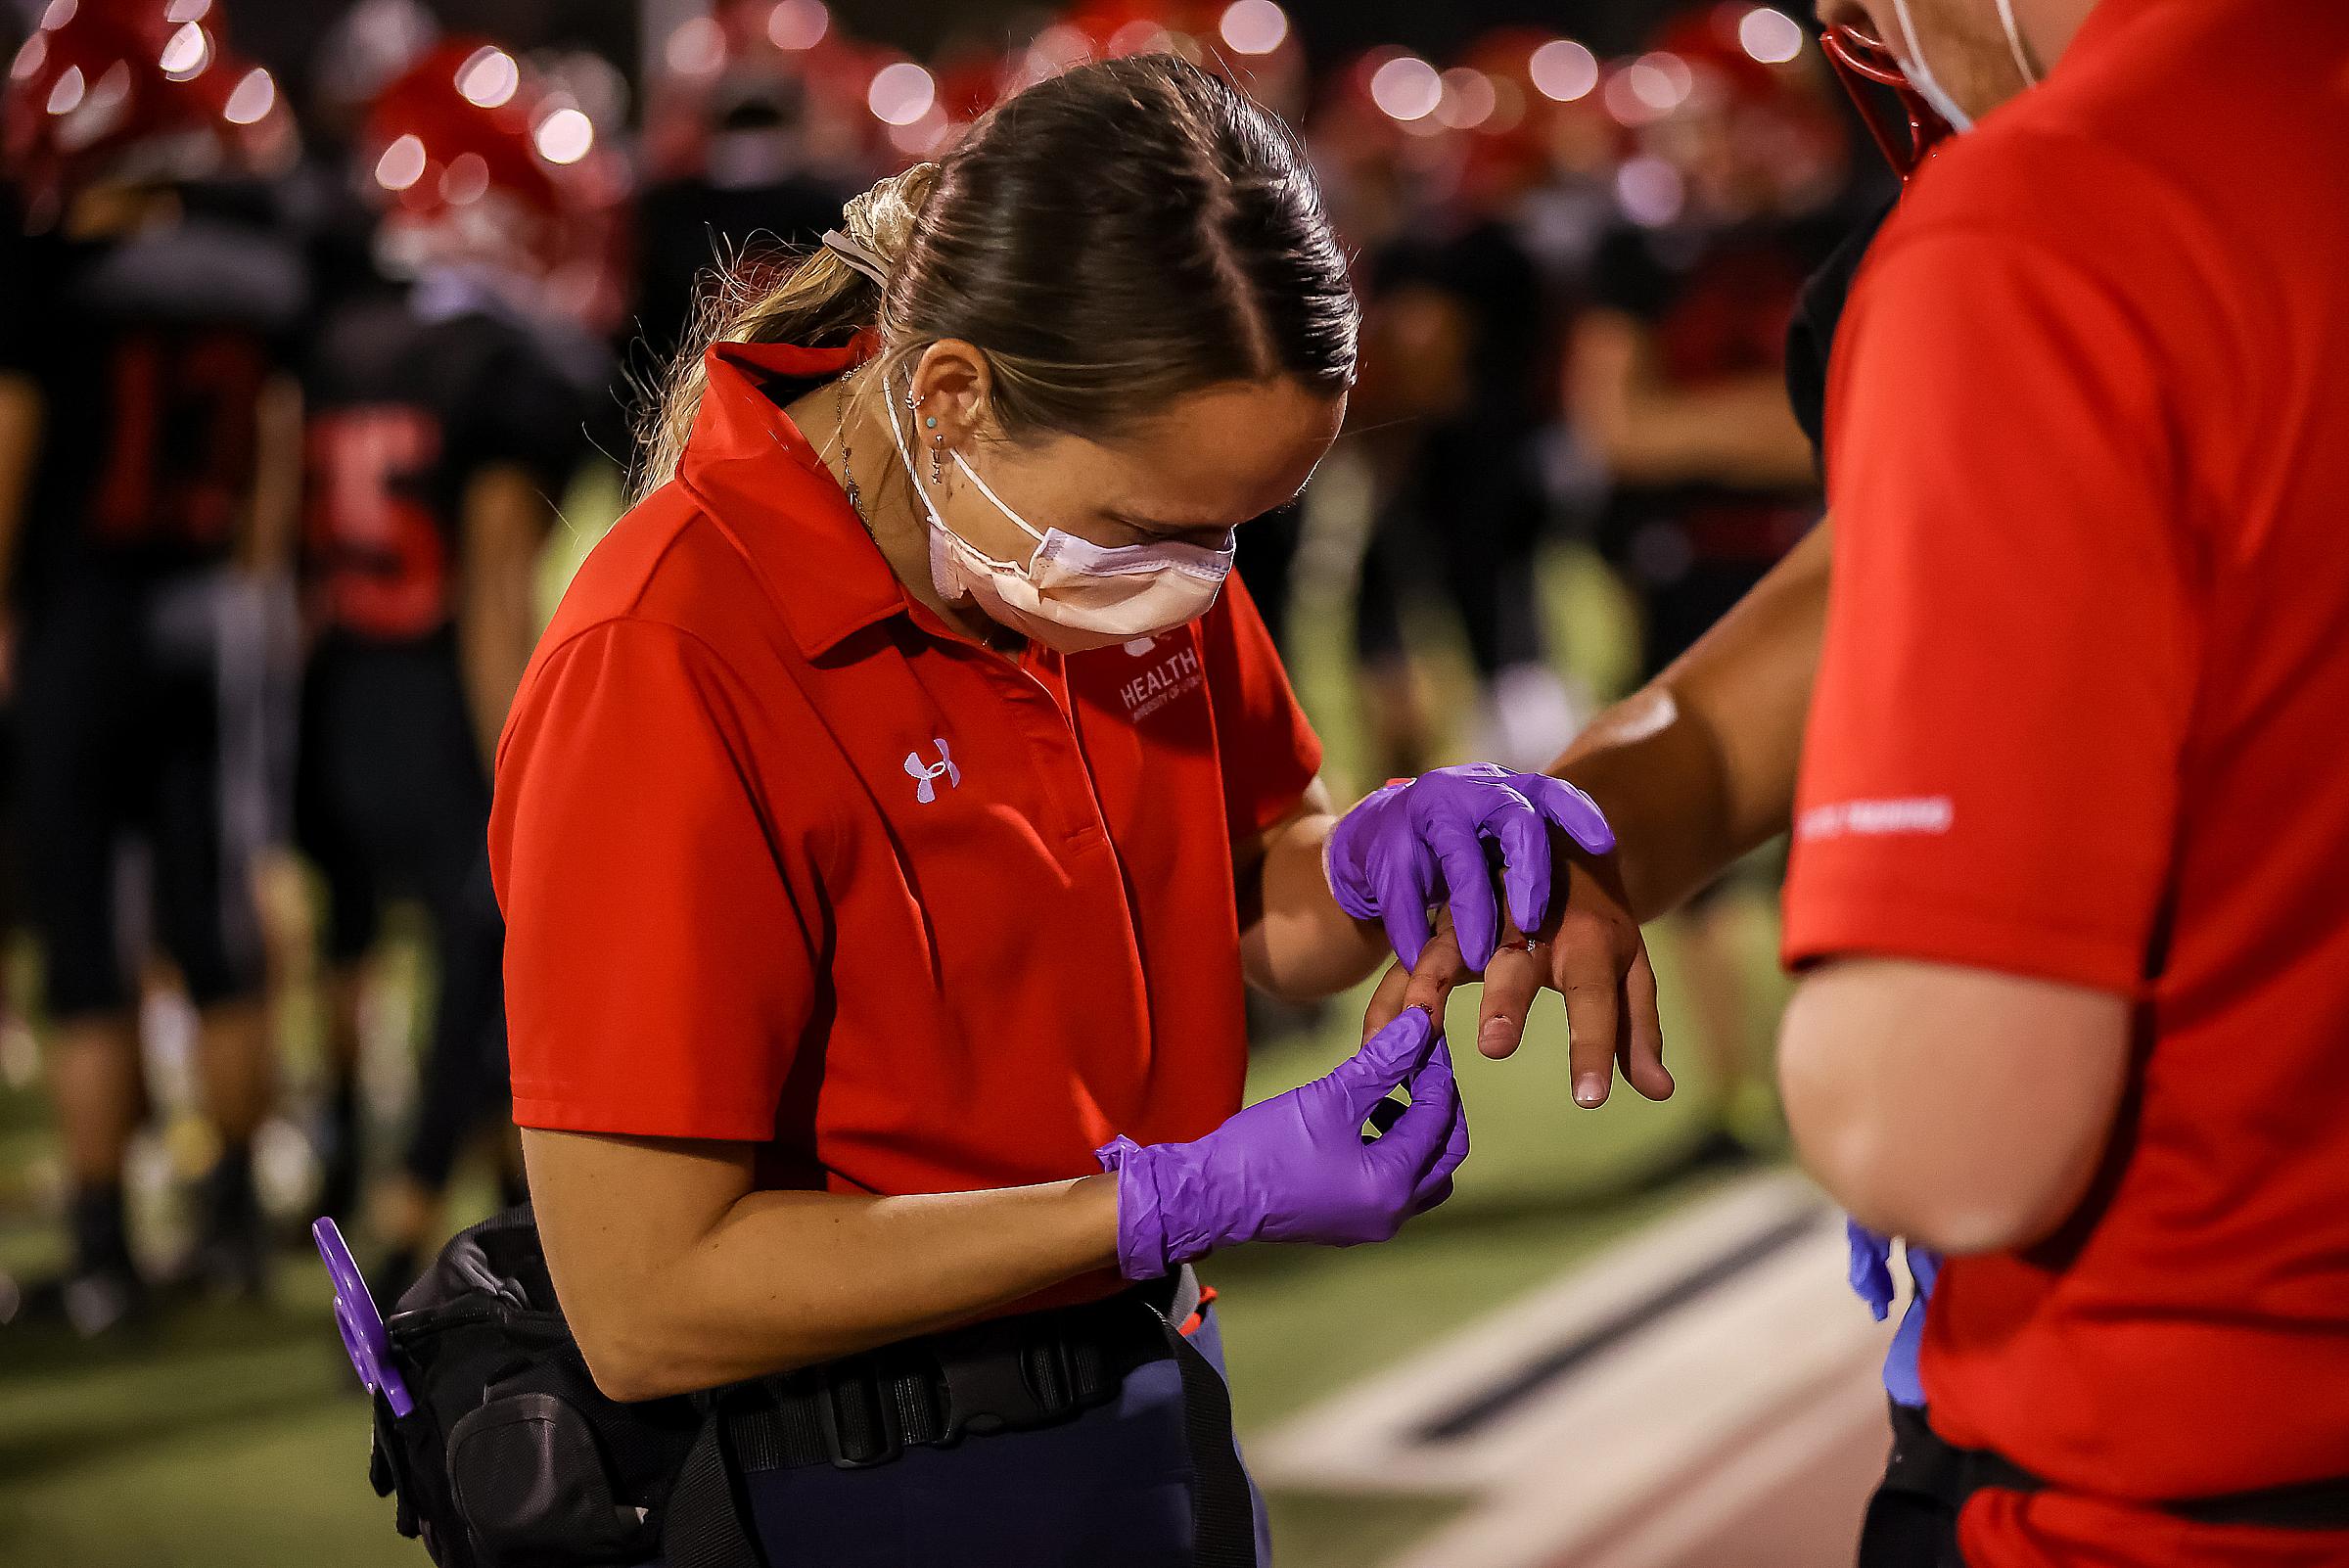 Athletic Trainer Jenny cleaning an athlet's injury at a game